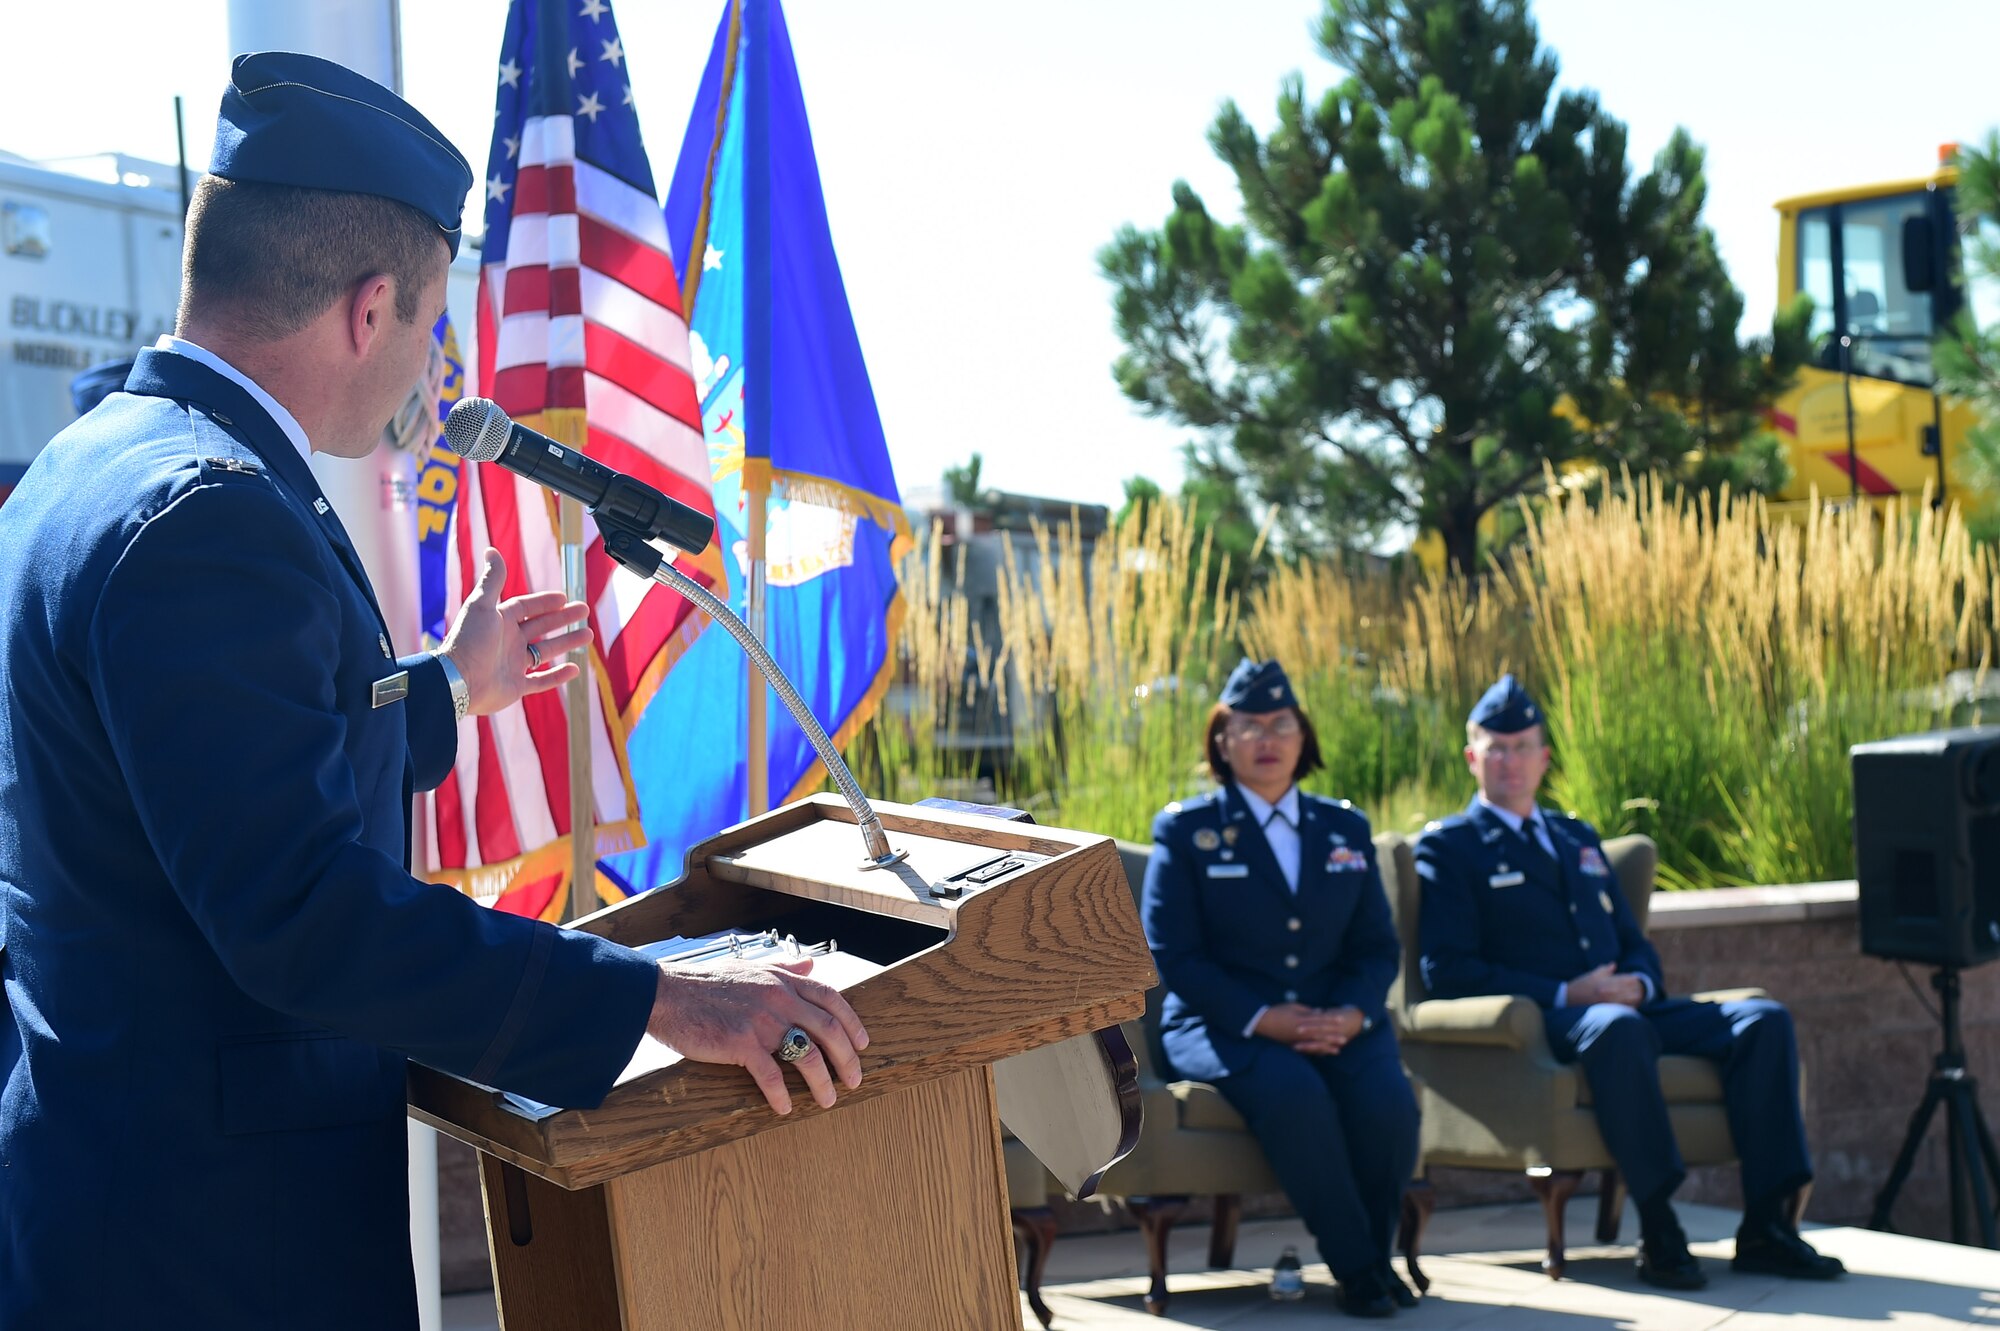 Col. John Wagner, 460th Space Wing commander, speaks August 1, 2016, during the 460th Mission Support Group change of command on Buckley Air Force Base, Colo. Over the last two years, Col. Rose Jourdan worked to improve Buckley AFB in many ways, including improving the dorms, Commissary and The Exchange. (U.S. Air Force photo by Airman 1st Class Gabrielle Spradling/Released)